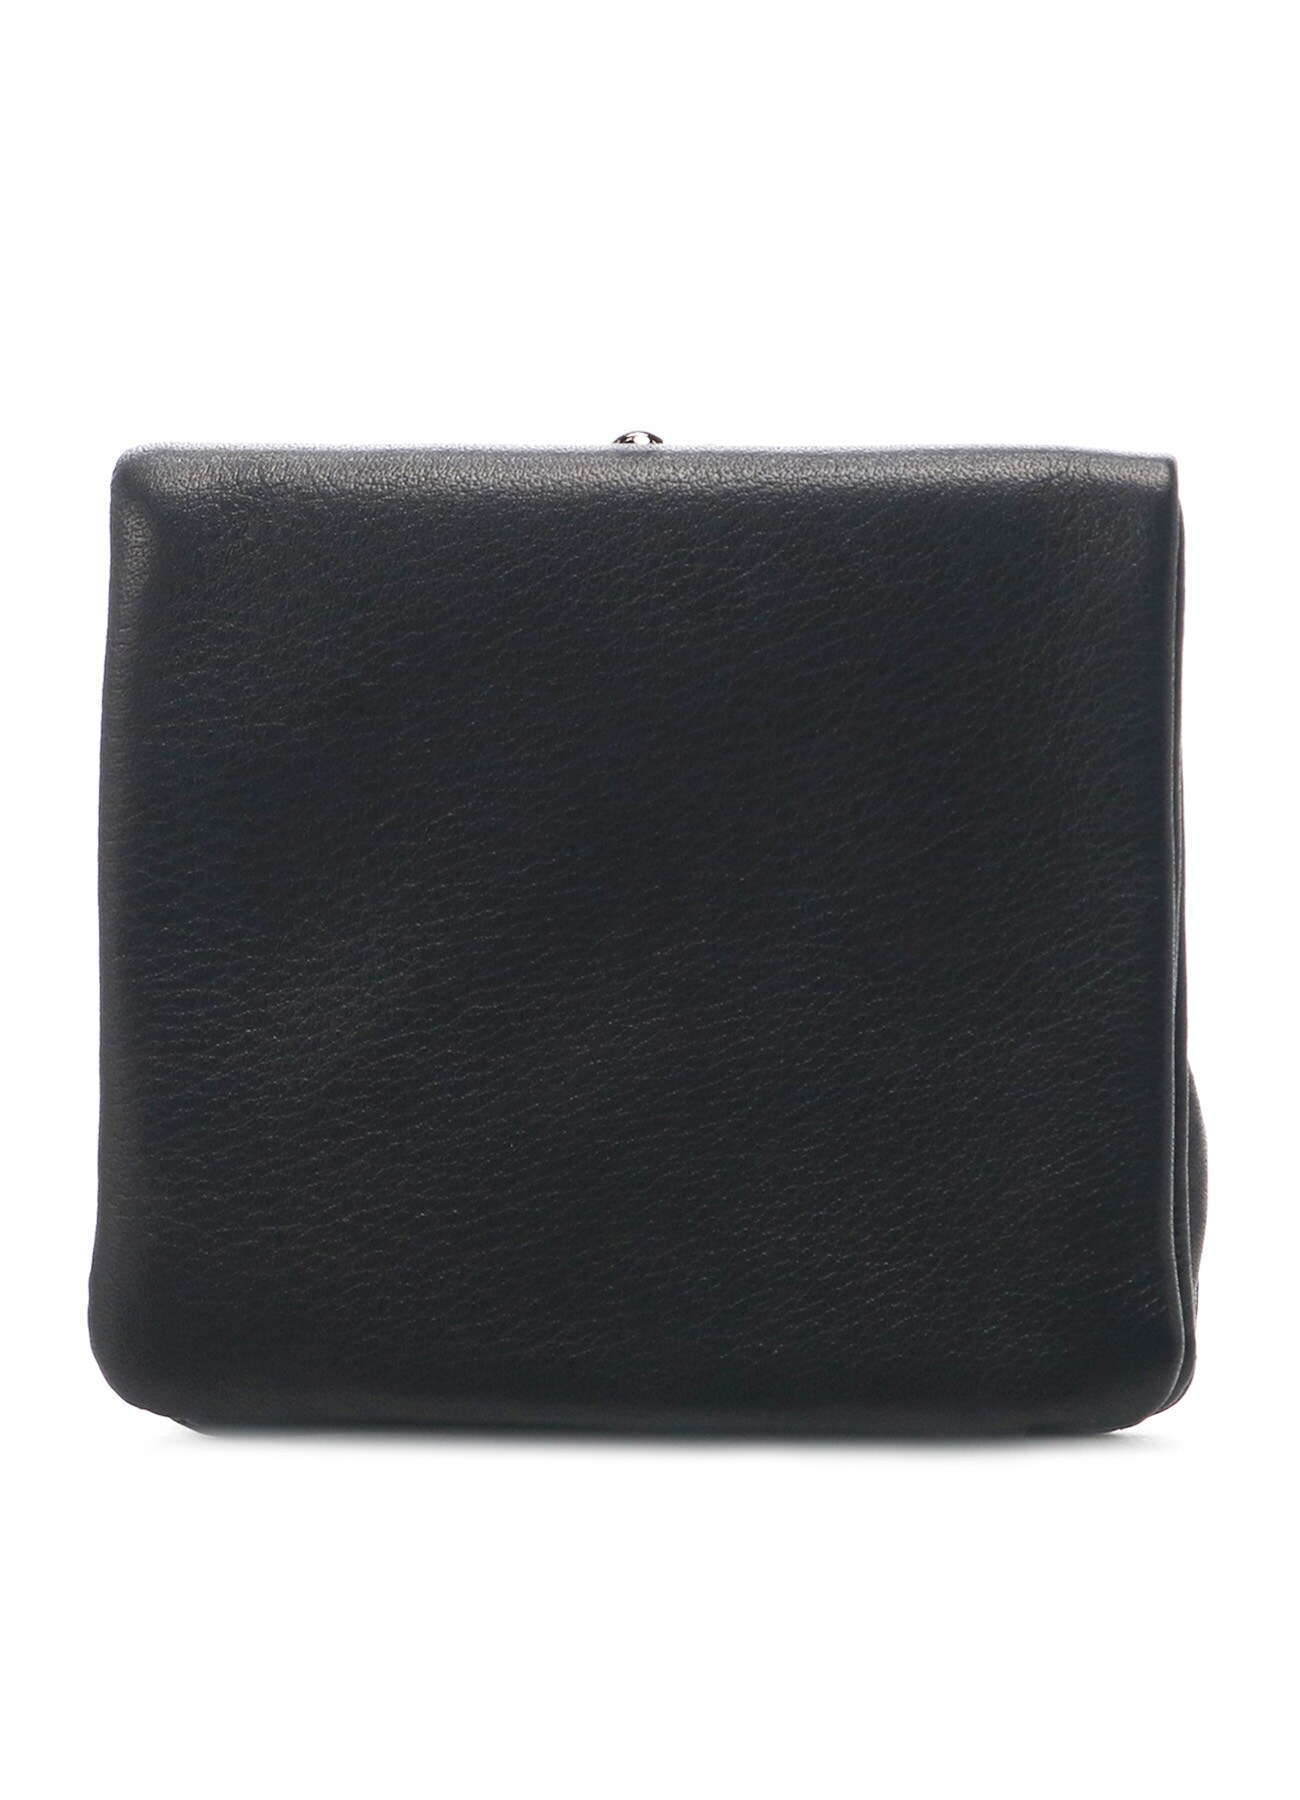 SOFT LEATHER CLASP WALLET